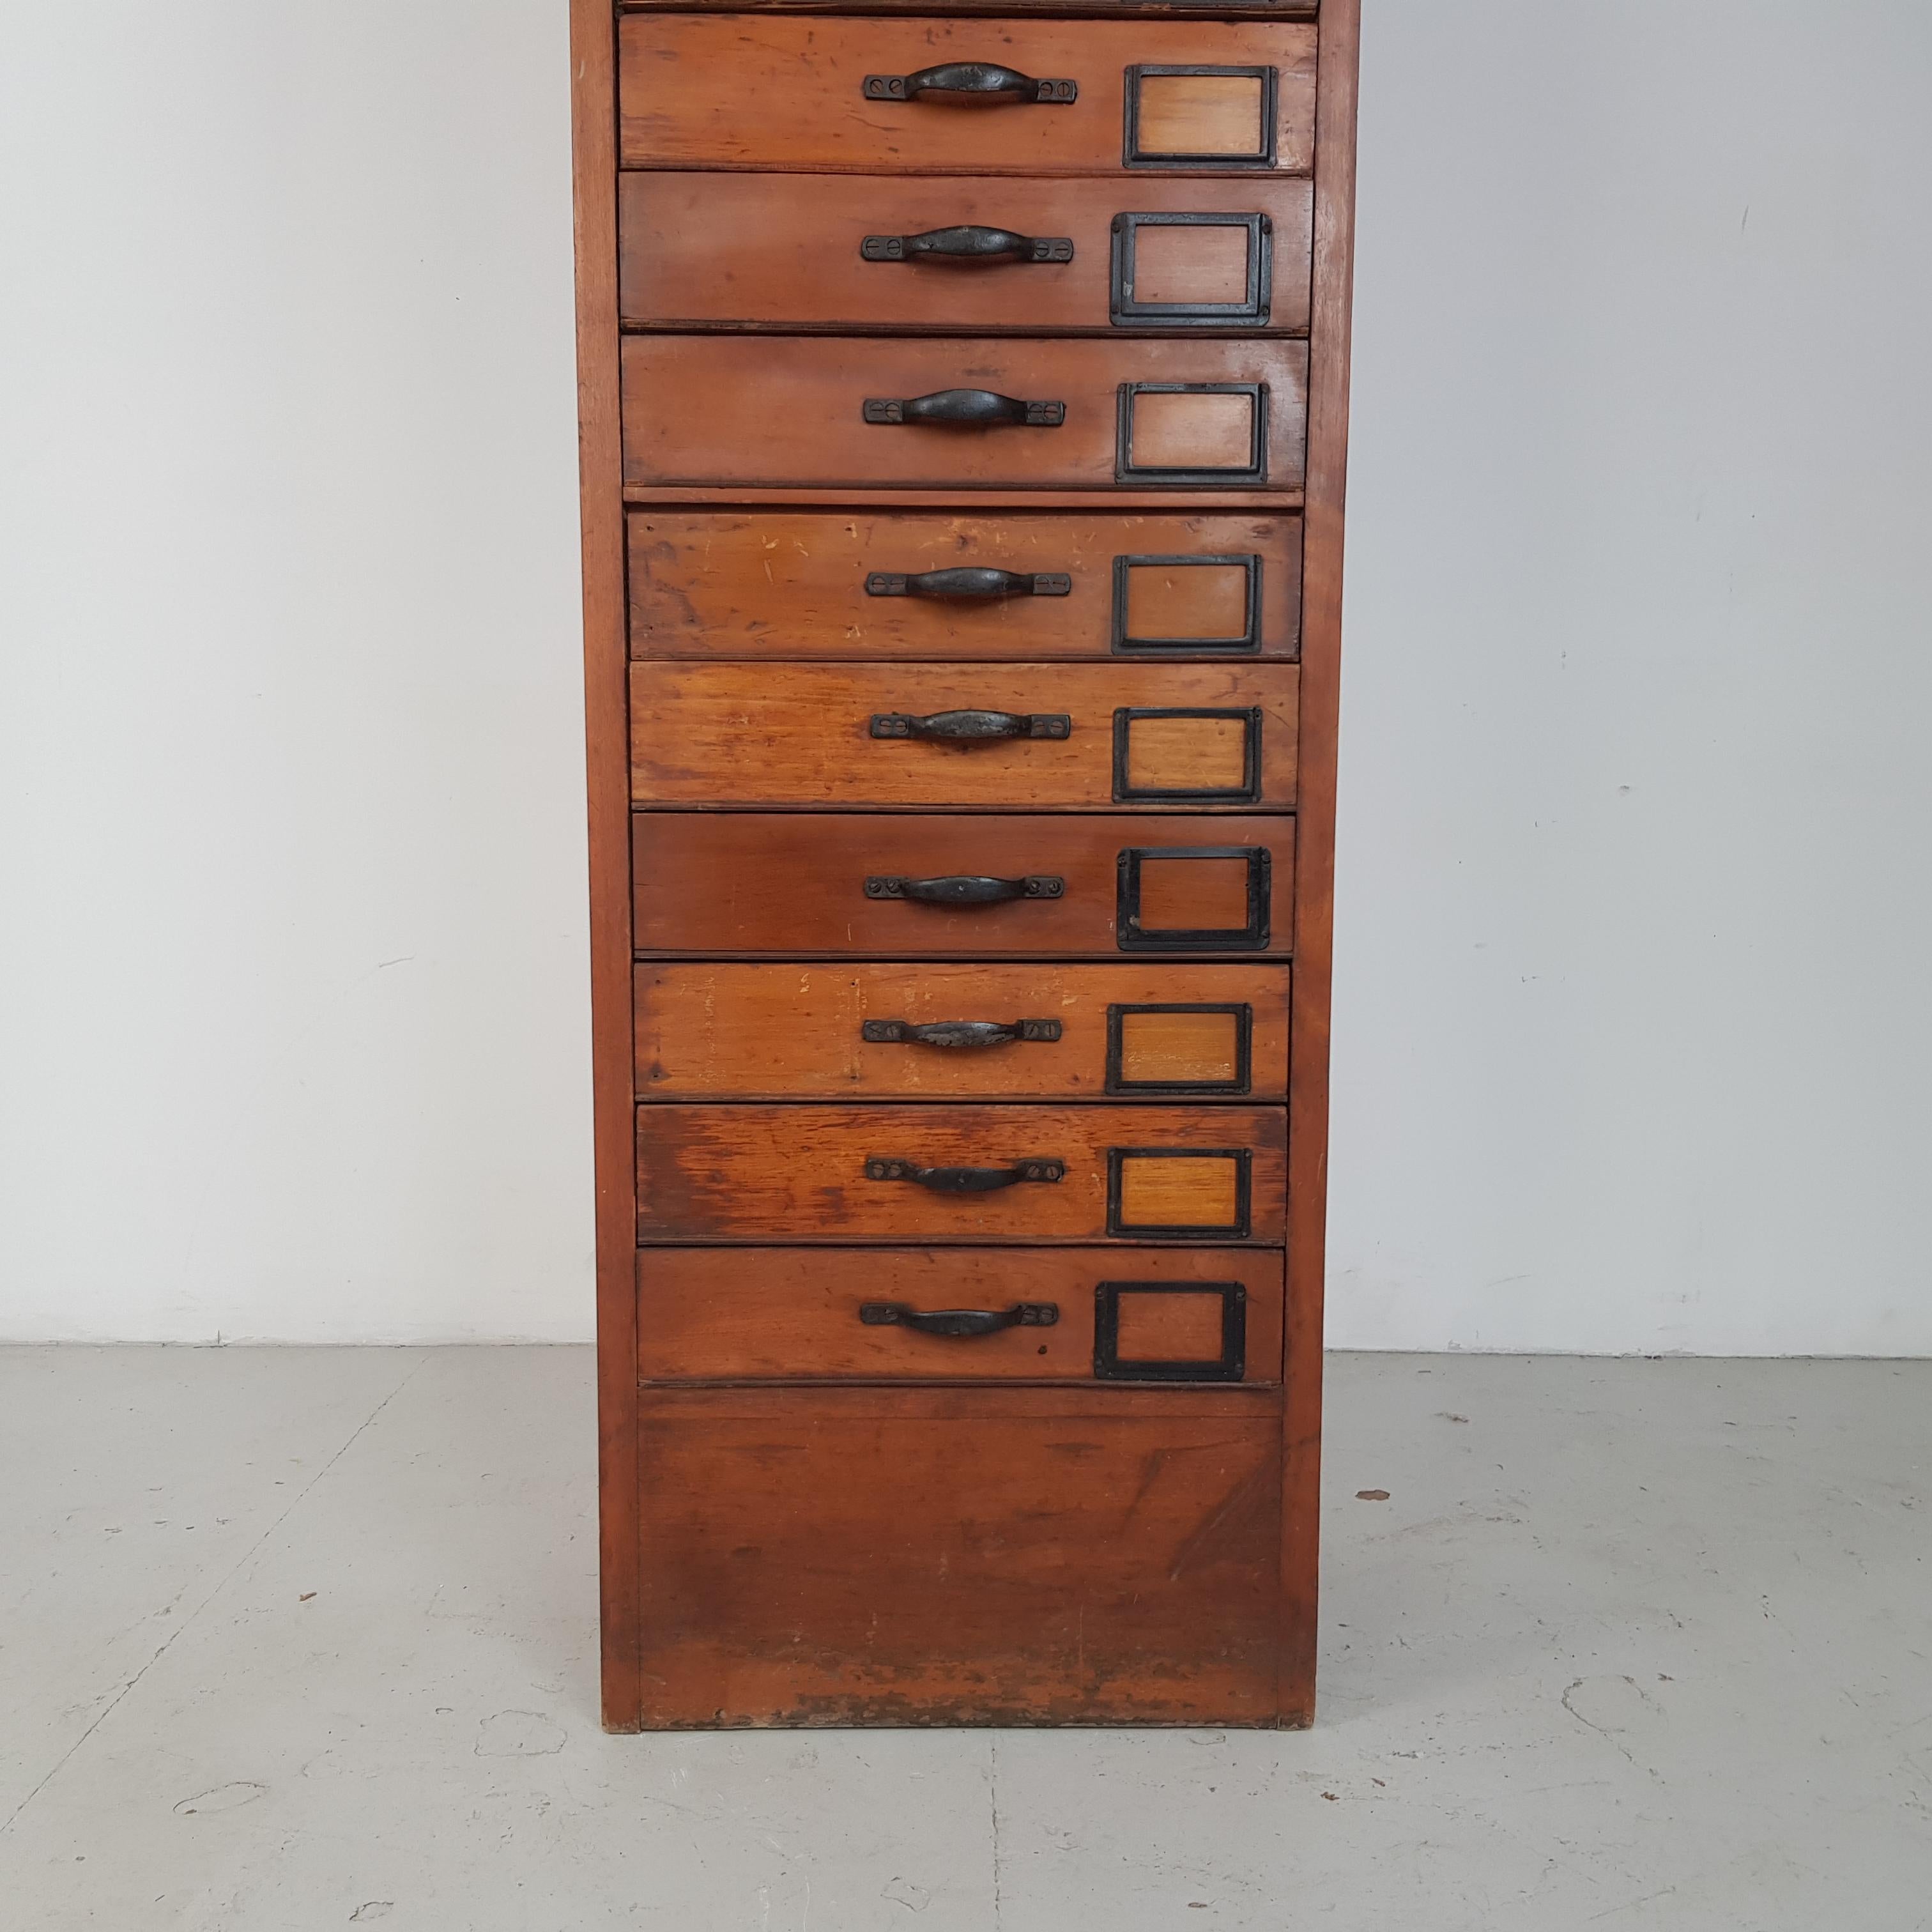 Vintage Early 20th Century Haberdashery Chest of Filing Drawers In Good Condition For Sale In Lewes, East Sussex